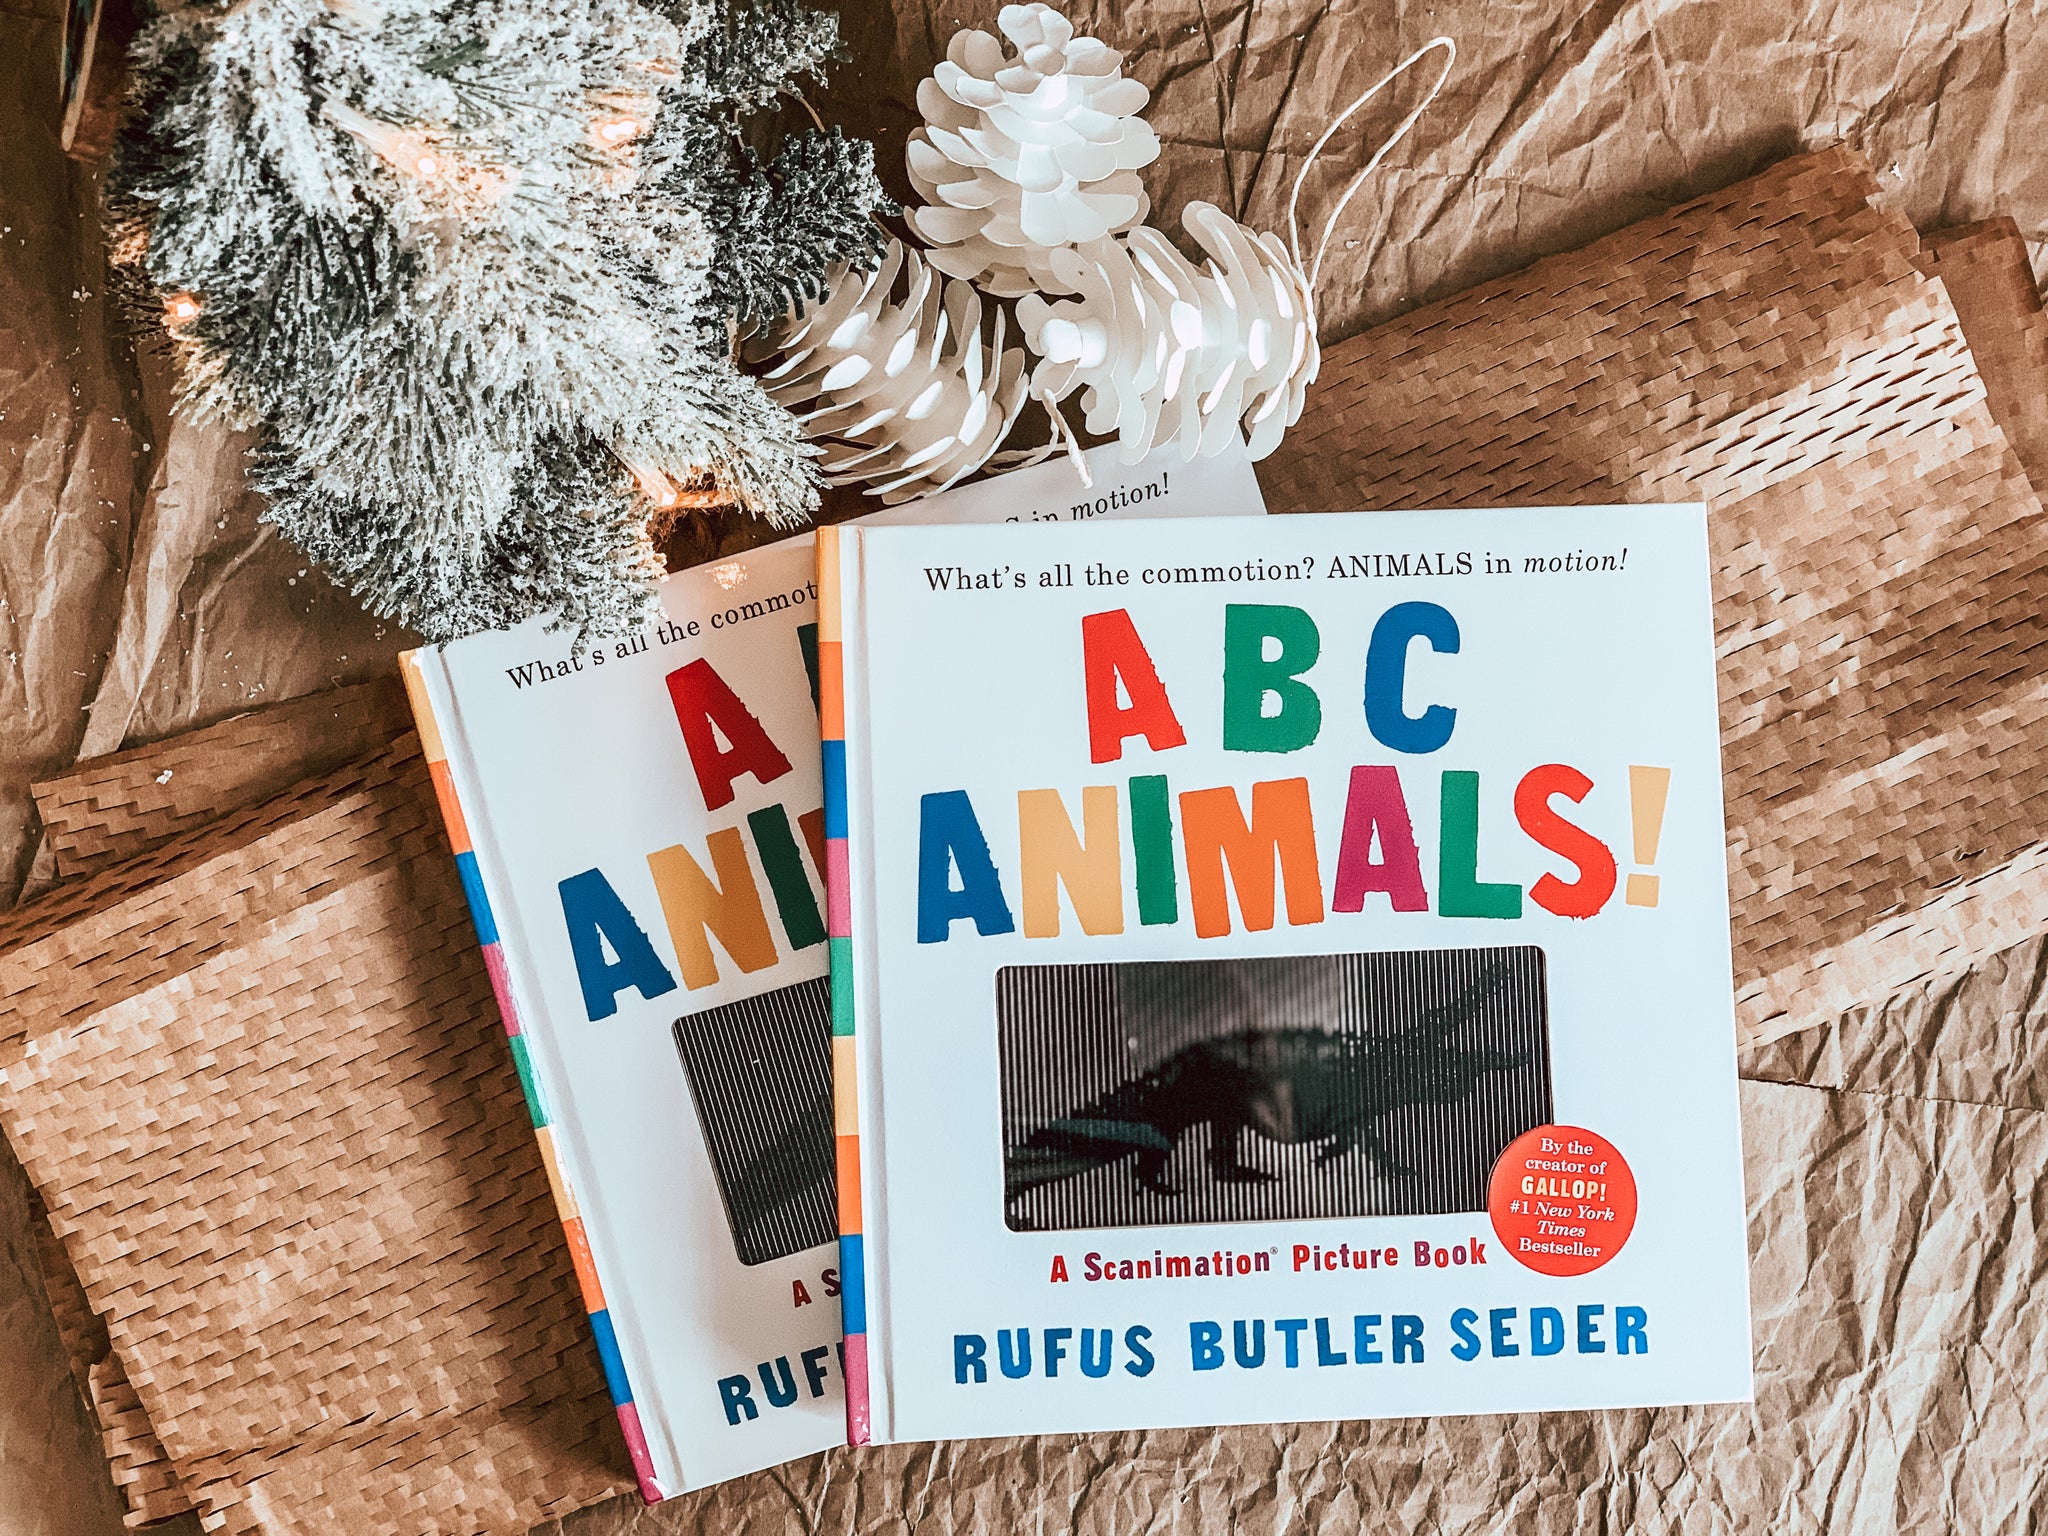 ABC Animals!: A Scanimation Picture Book Book by Rufus Butler Seder